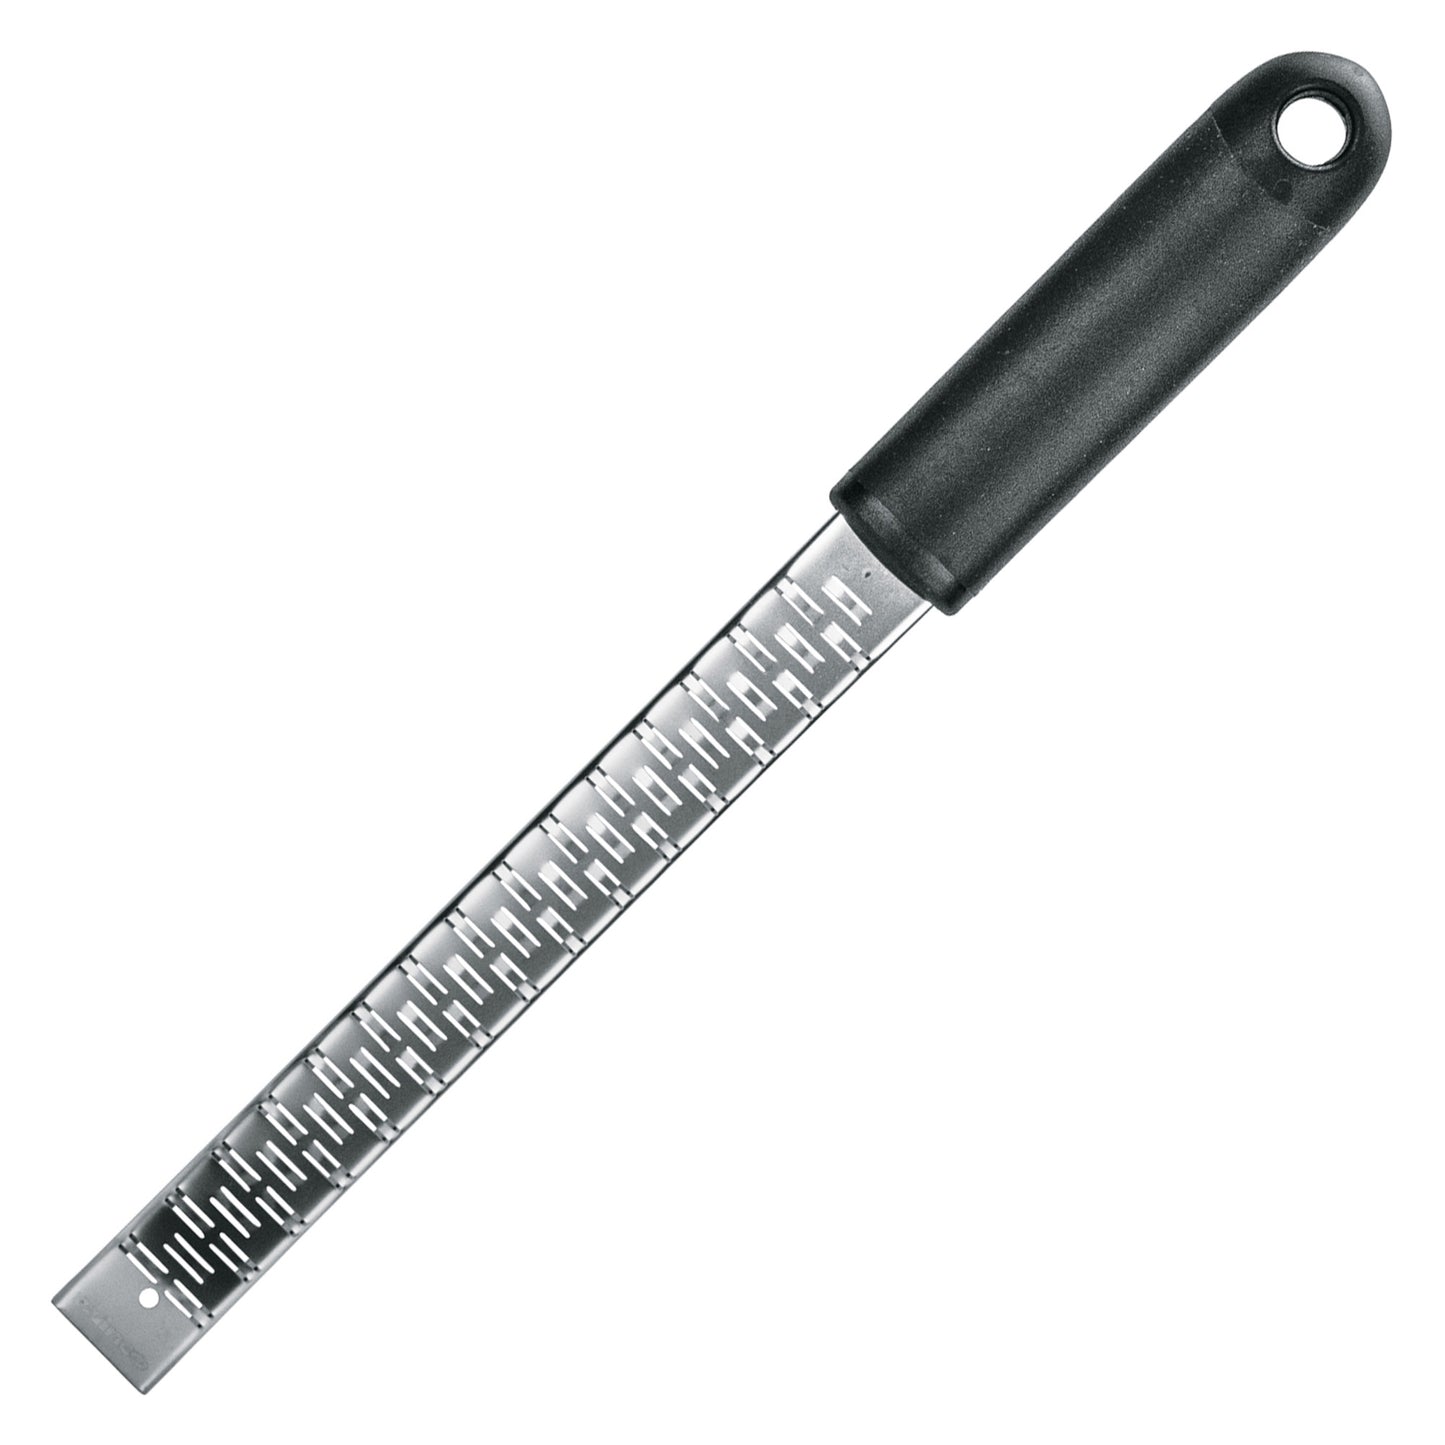 GT-106 - Grater with Soft Grip Handle - Ribbon